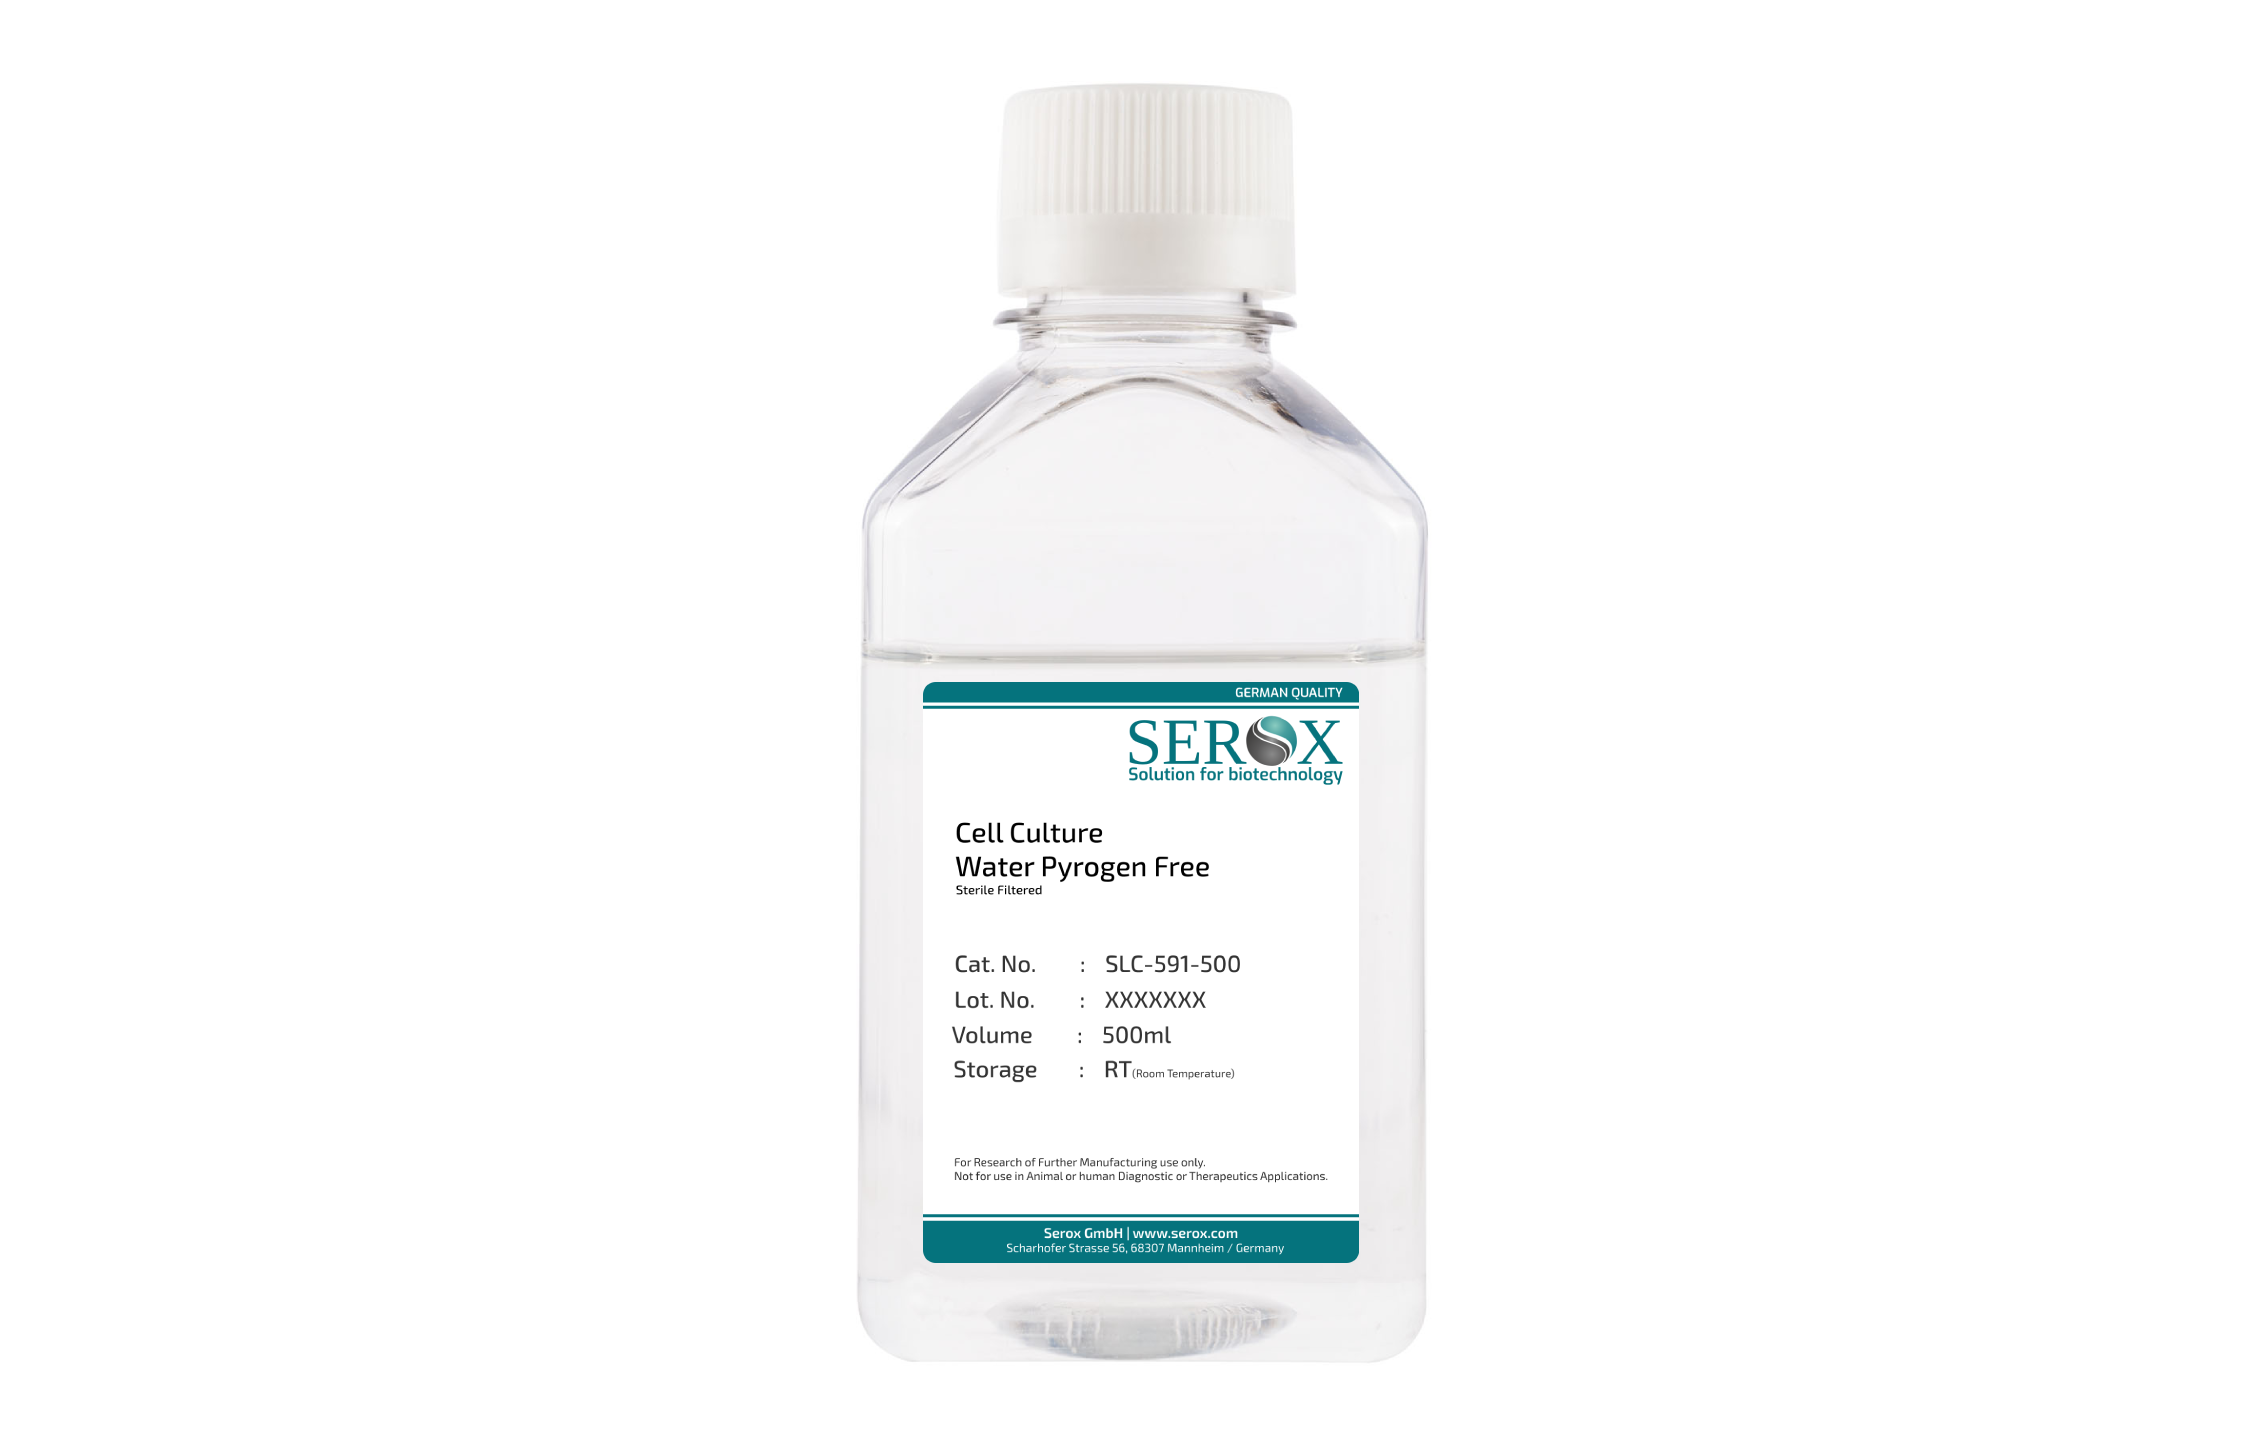 Cell Culture Water Pyrogen Free